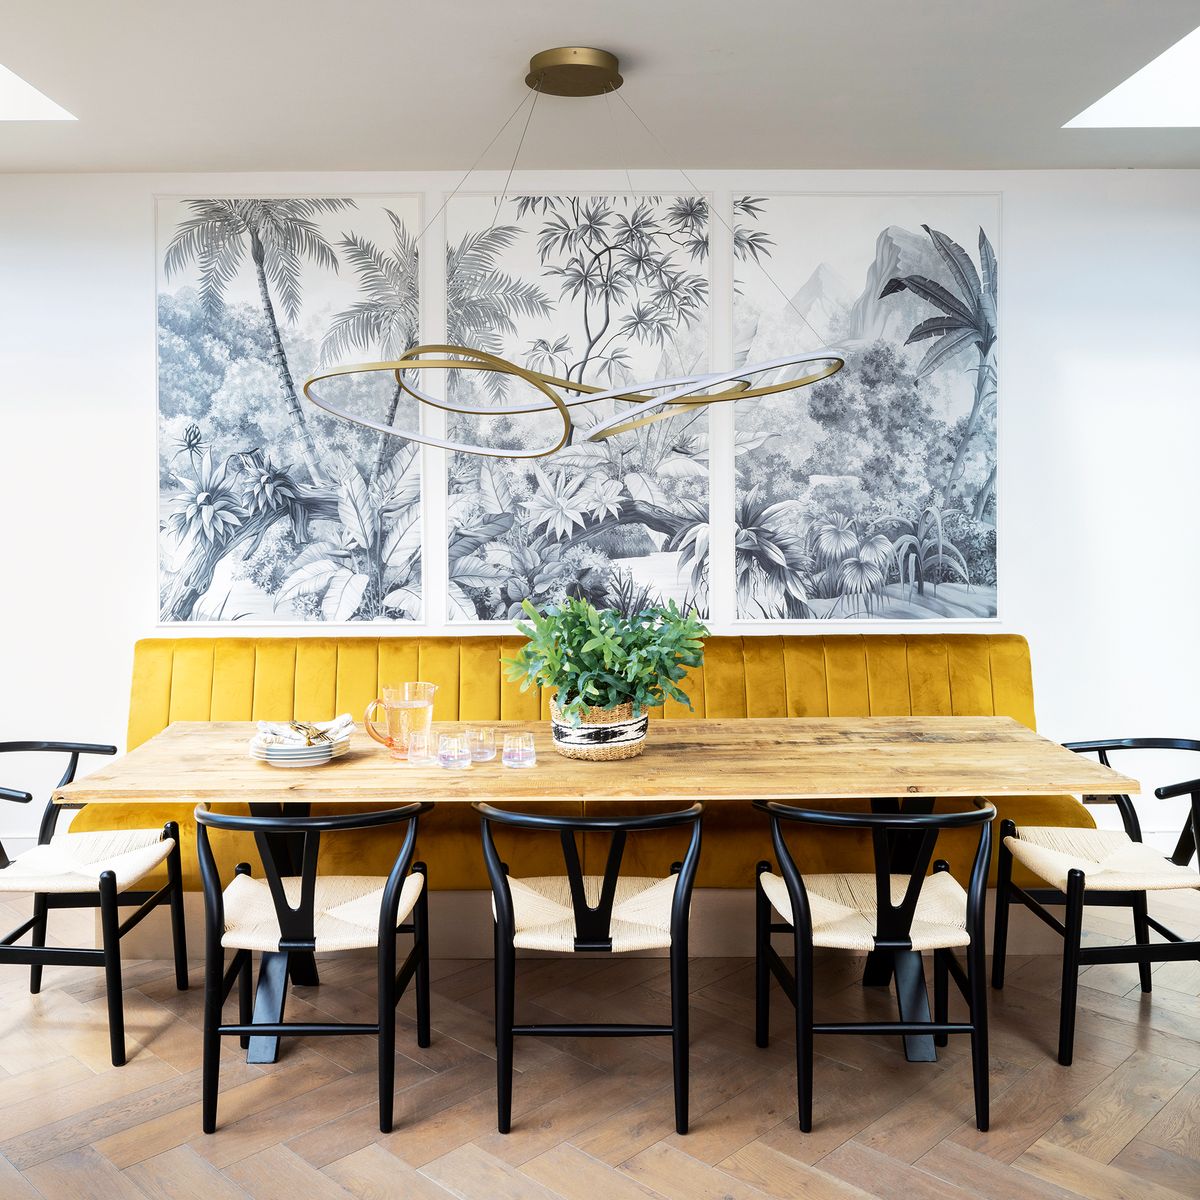 The rule of three explained by interior design experts